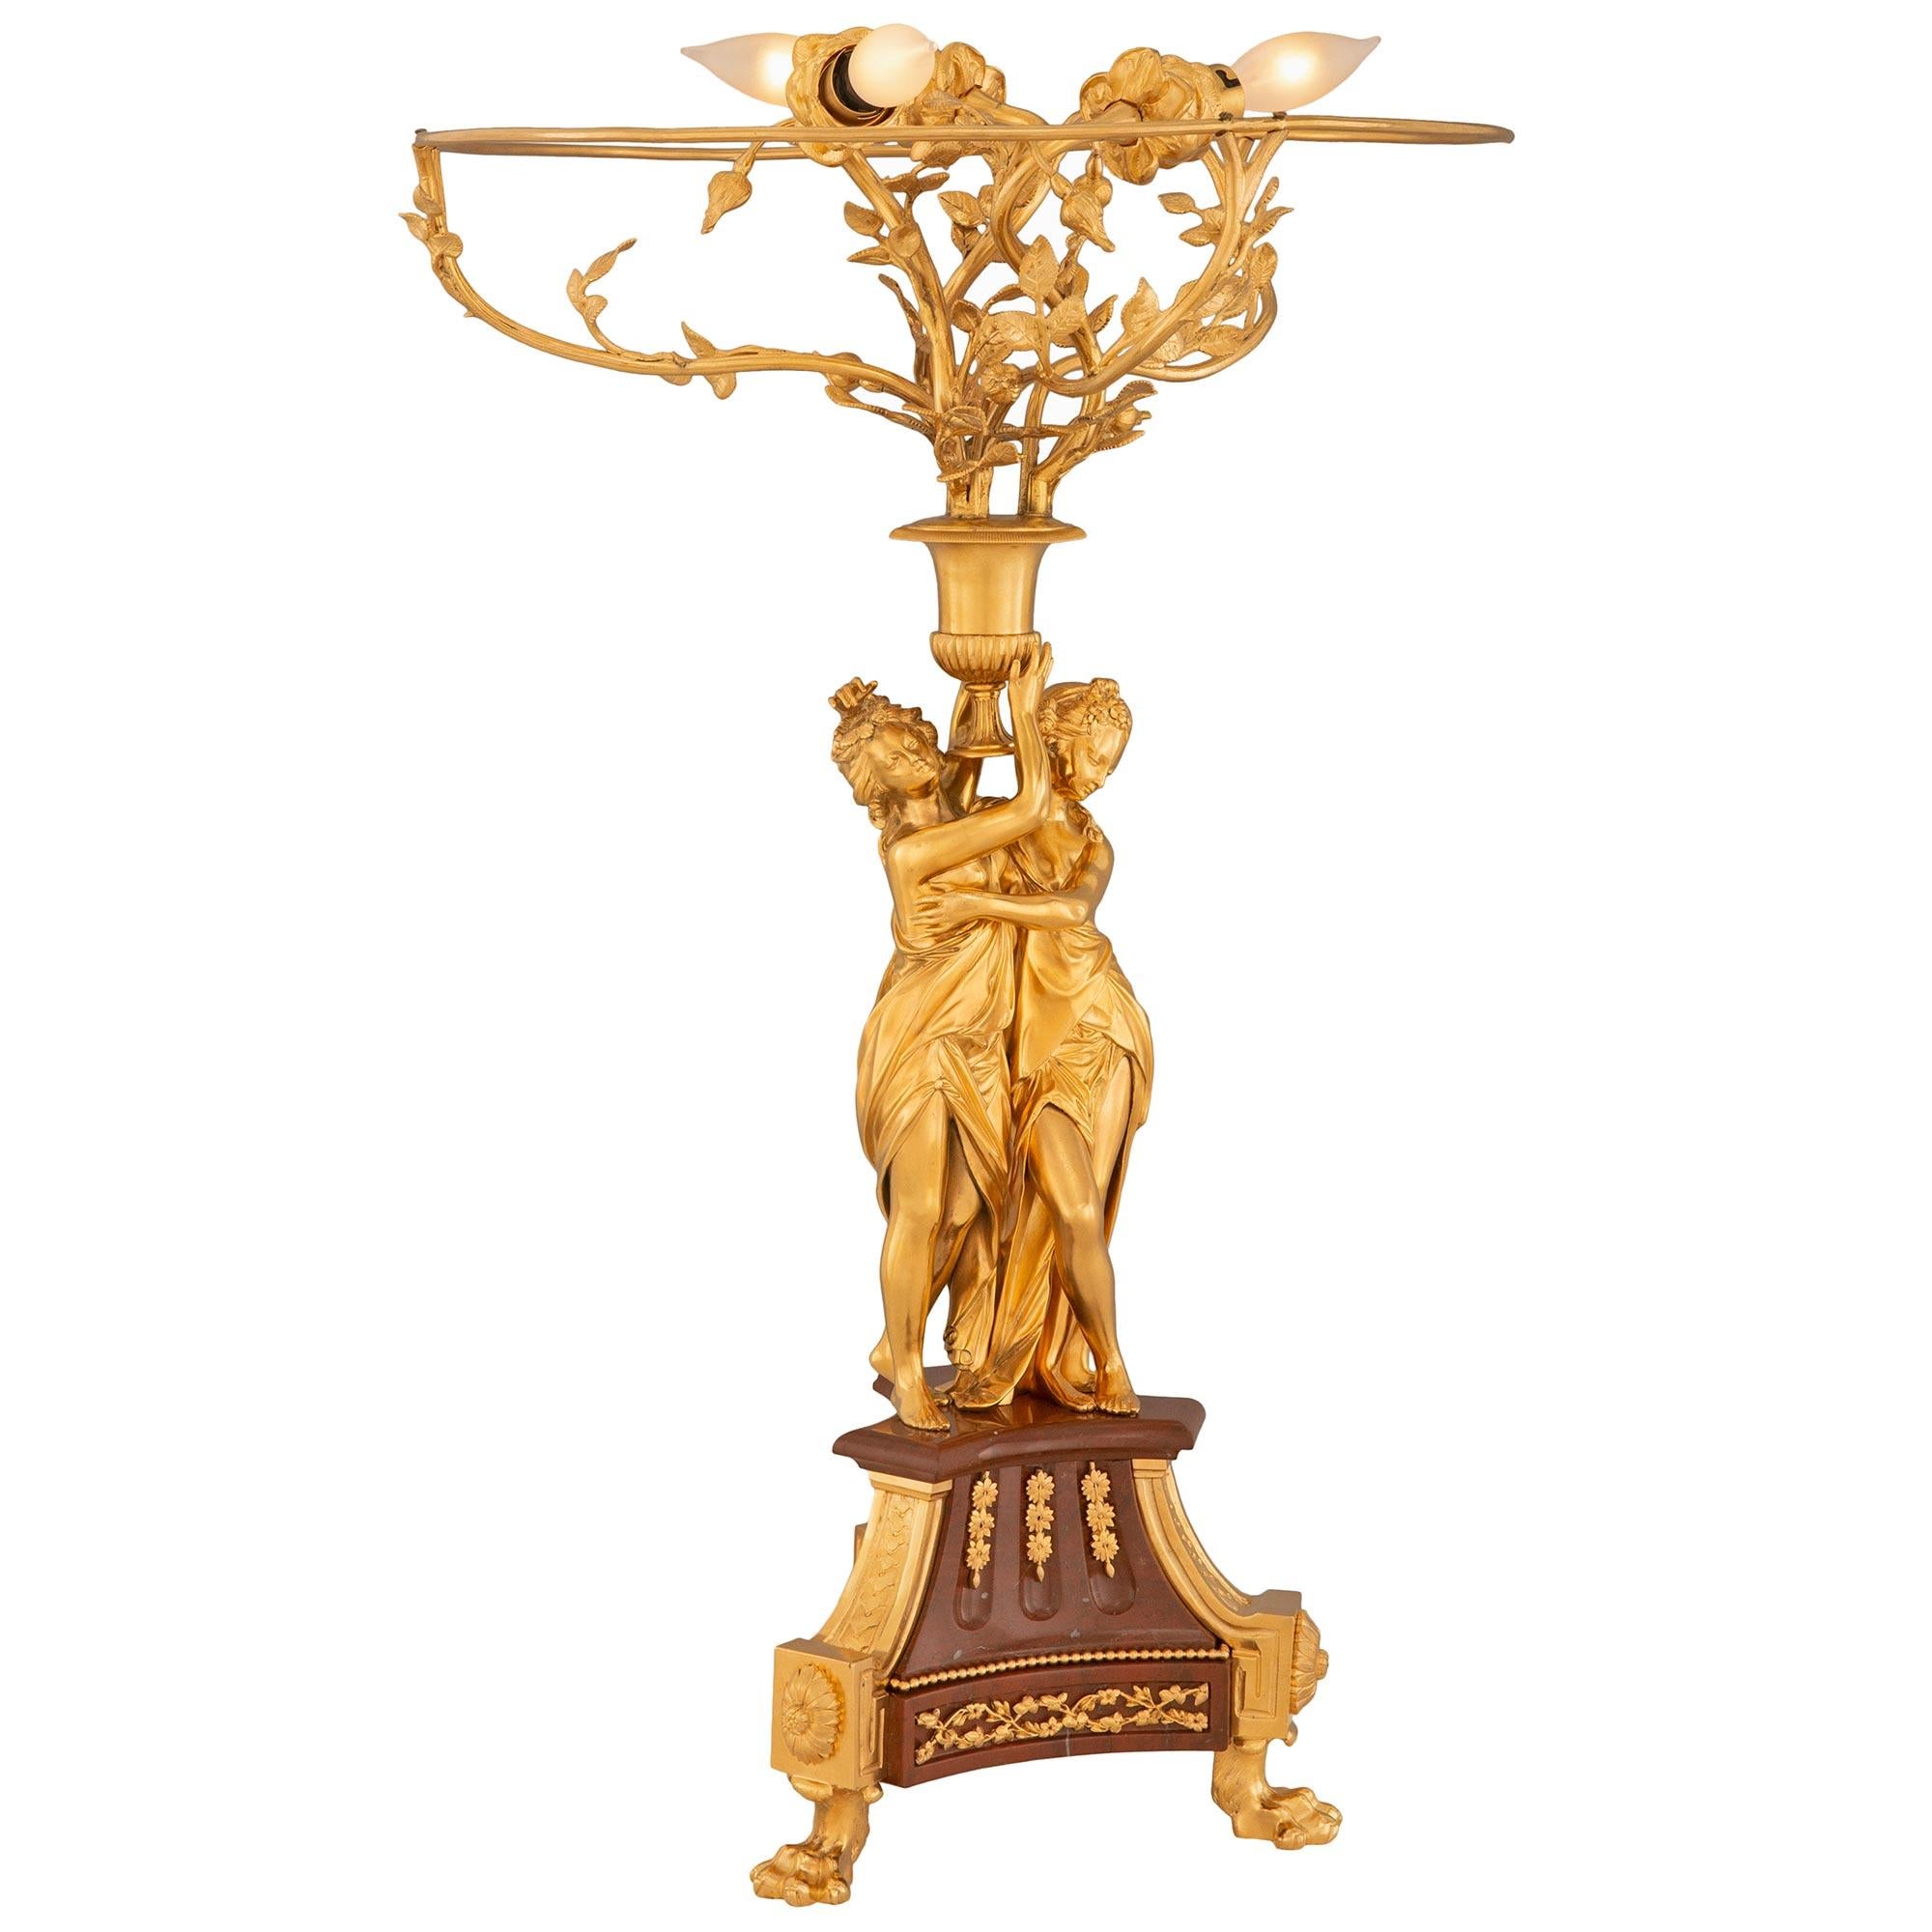 An exceptional and large scale French 19th century Louis XVI st. Belle Époque period ormolu and Rouge Griotte marble lamp. The lamp is raised by three impressive paw feet below striking block rosettes and fine curved ormolu bands encasing the fluted